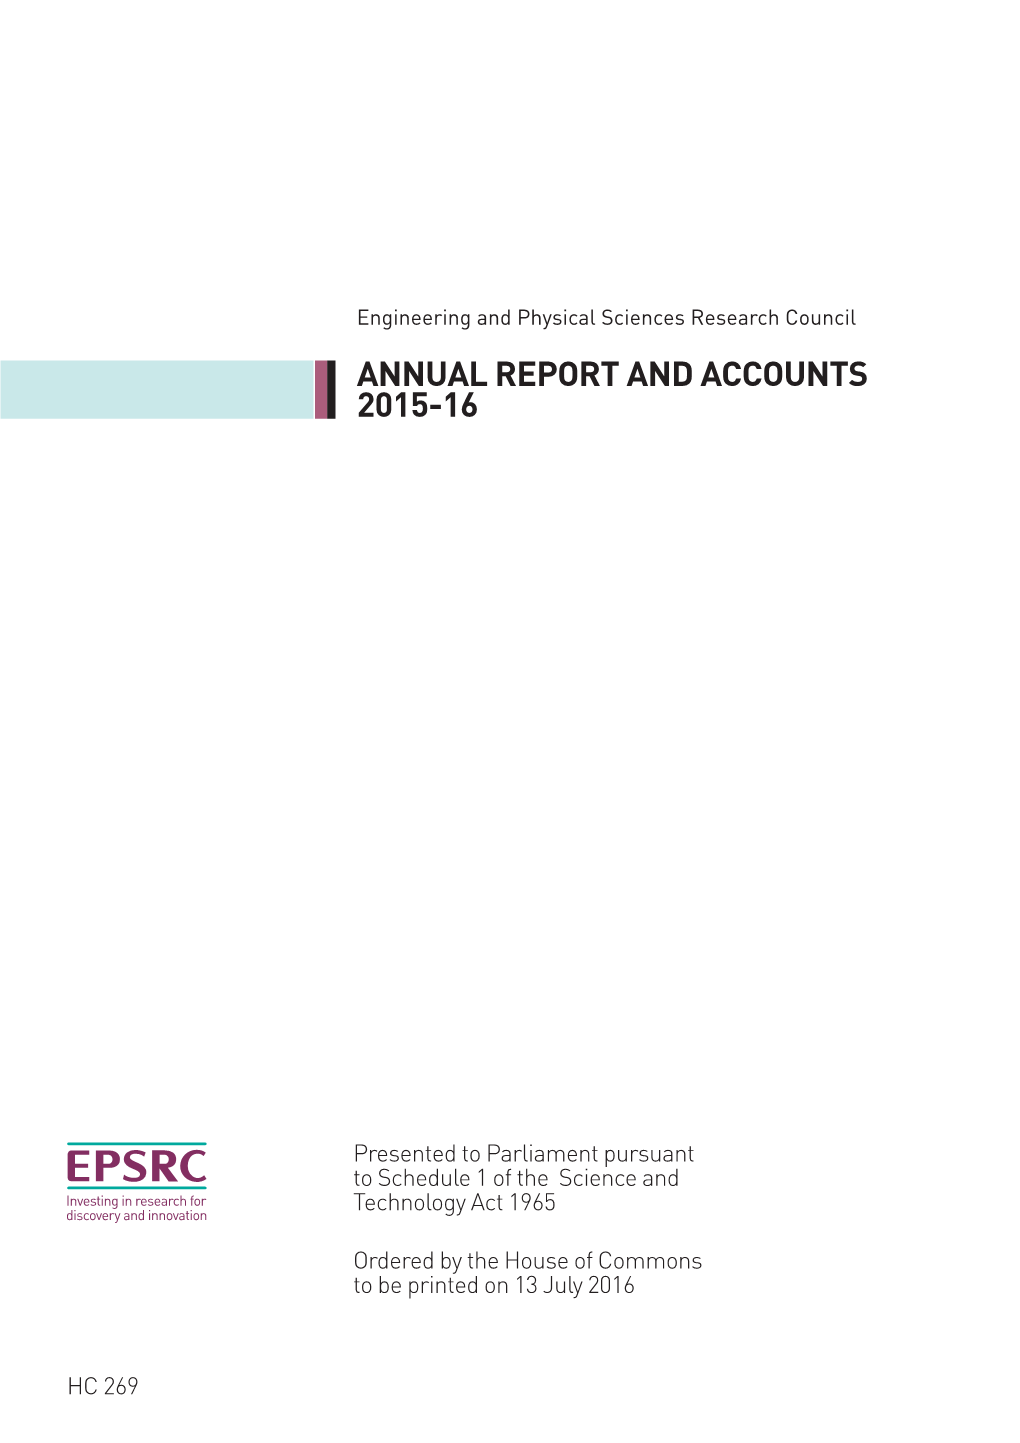 Engineering and Physical Sciences Research Council ANNUAL REPORT and ACCOUNTS 2015-16